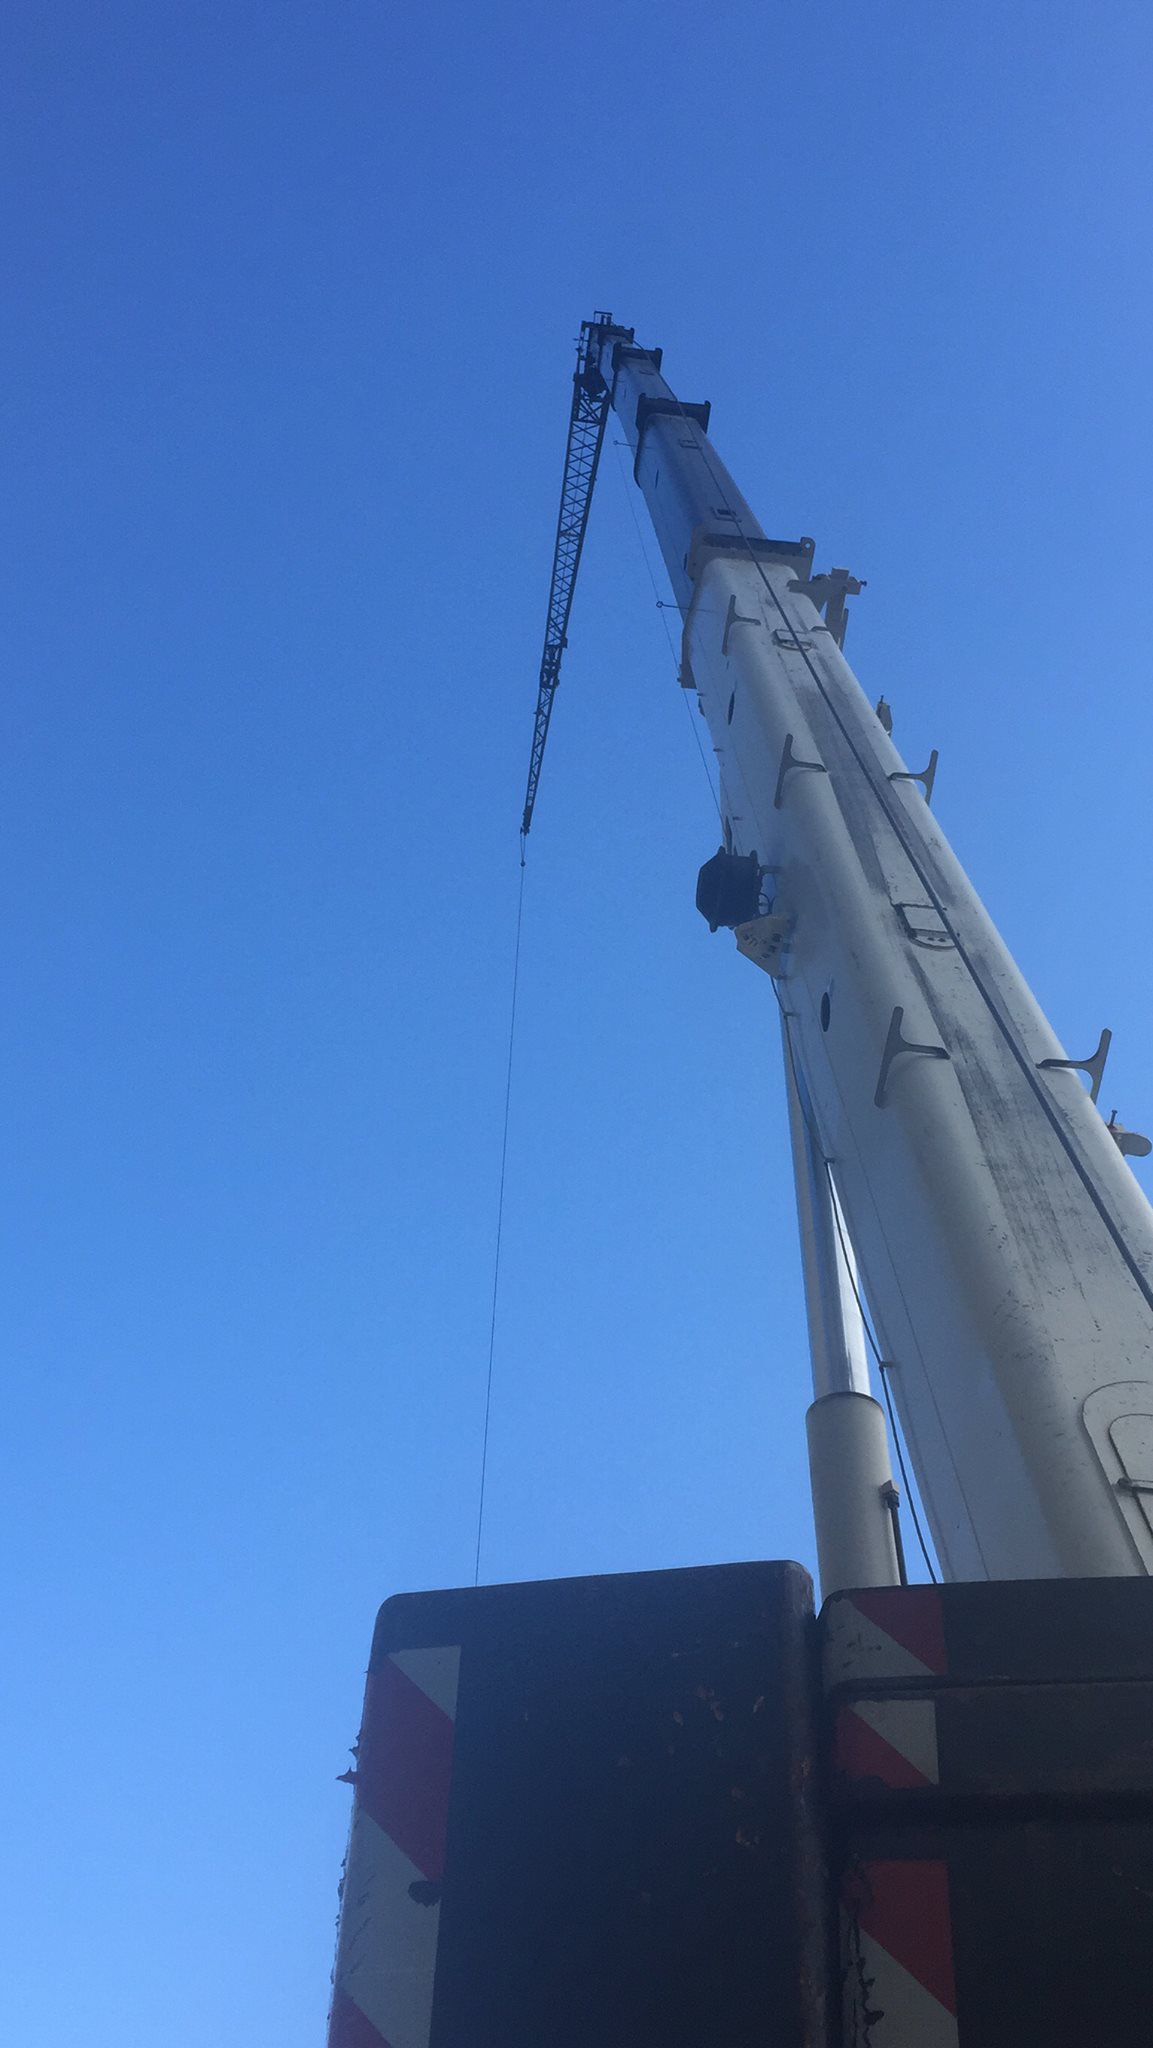 millwright work done by a mobile crane